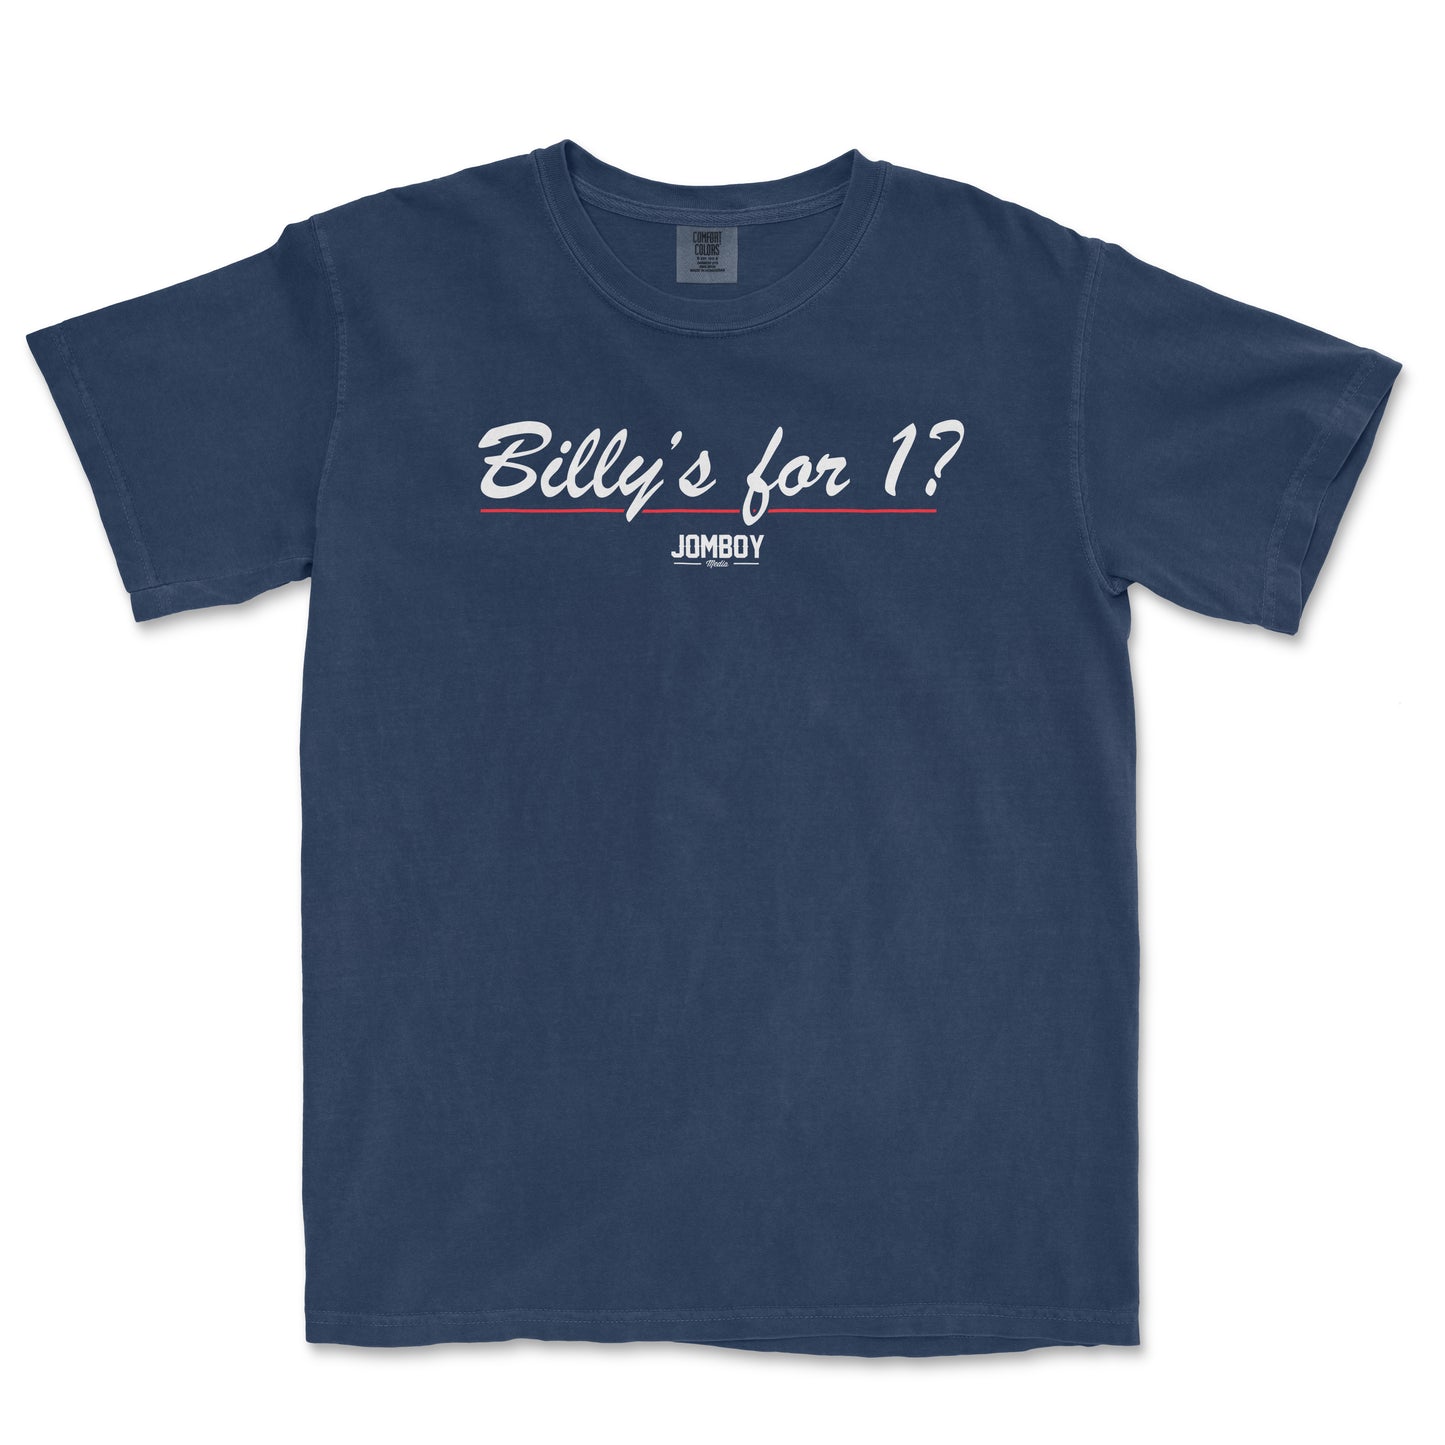 Billy's for 1? | Comfort Colors® Vintage Tee